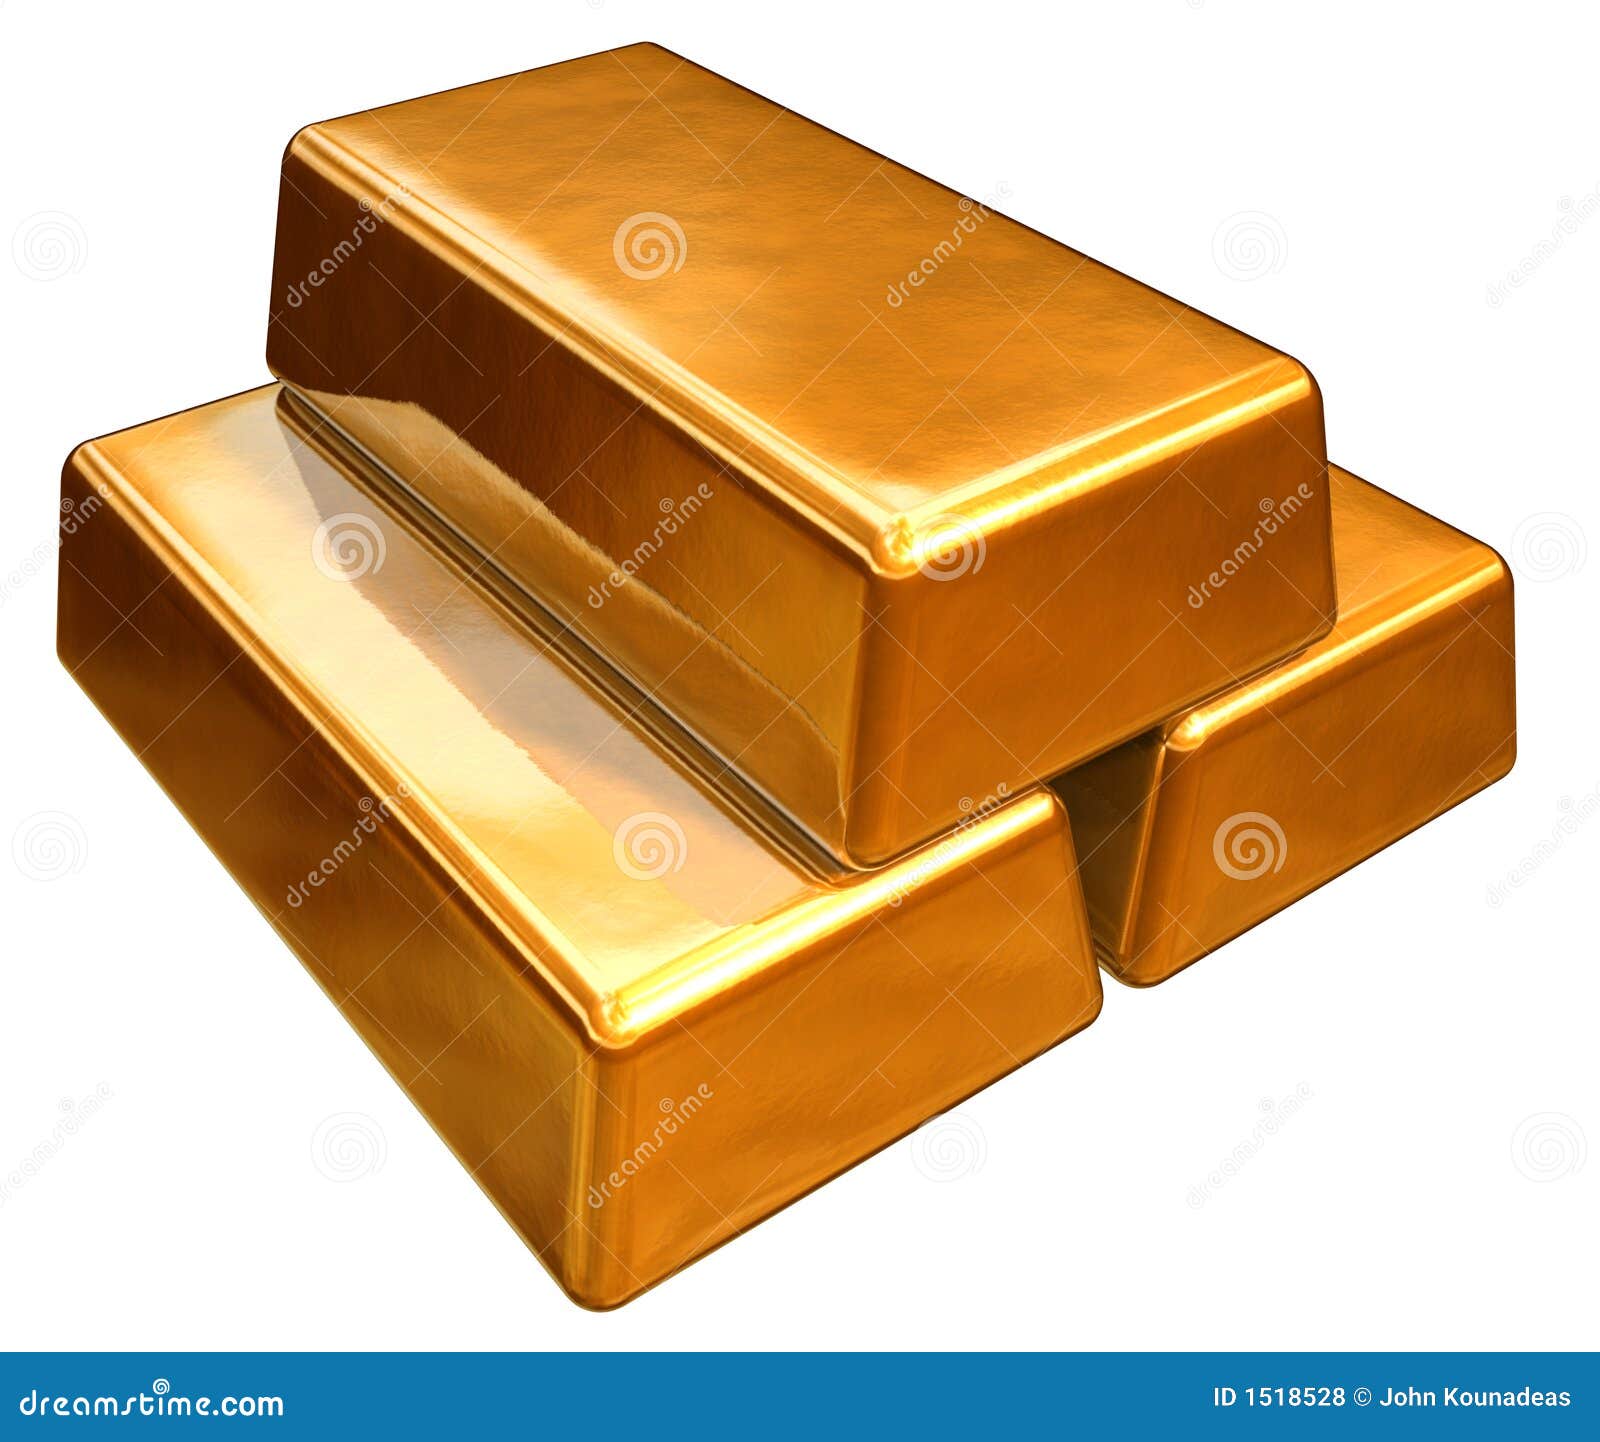 city forex gold rates